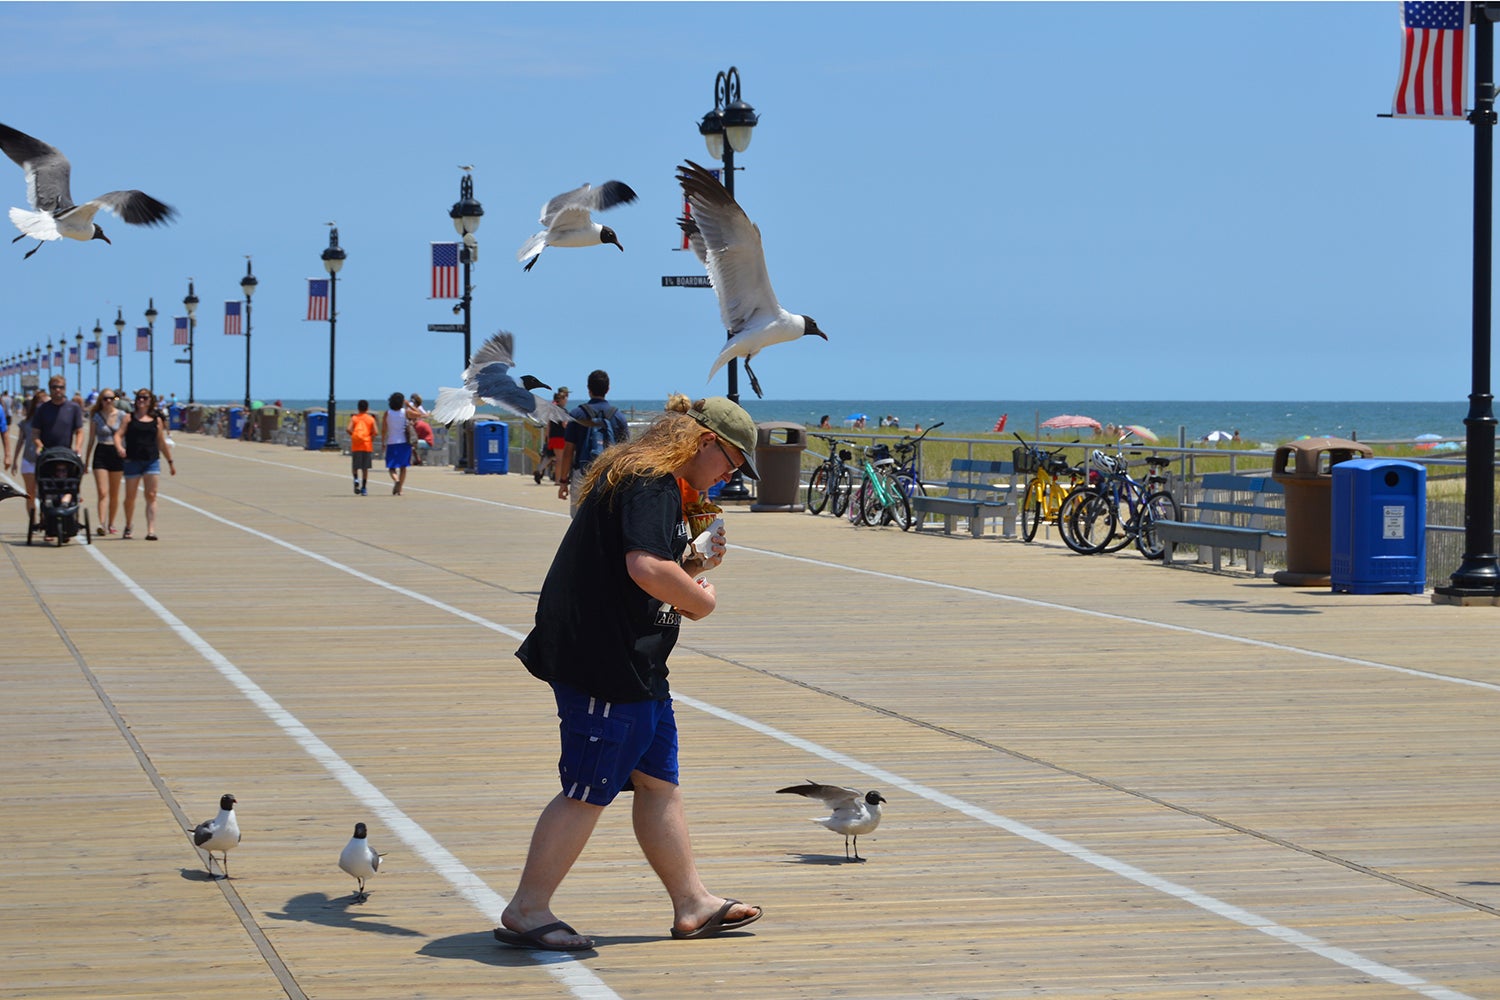 person crosses boardwalk while being followed and harassed by seagulls